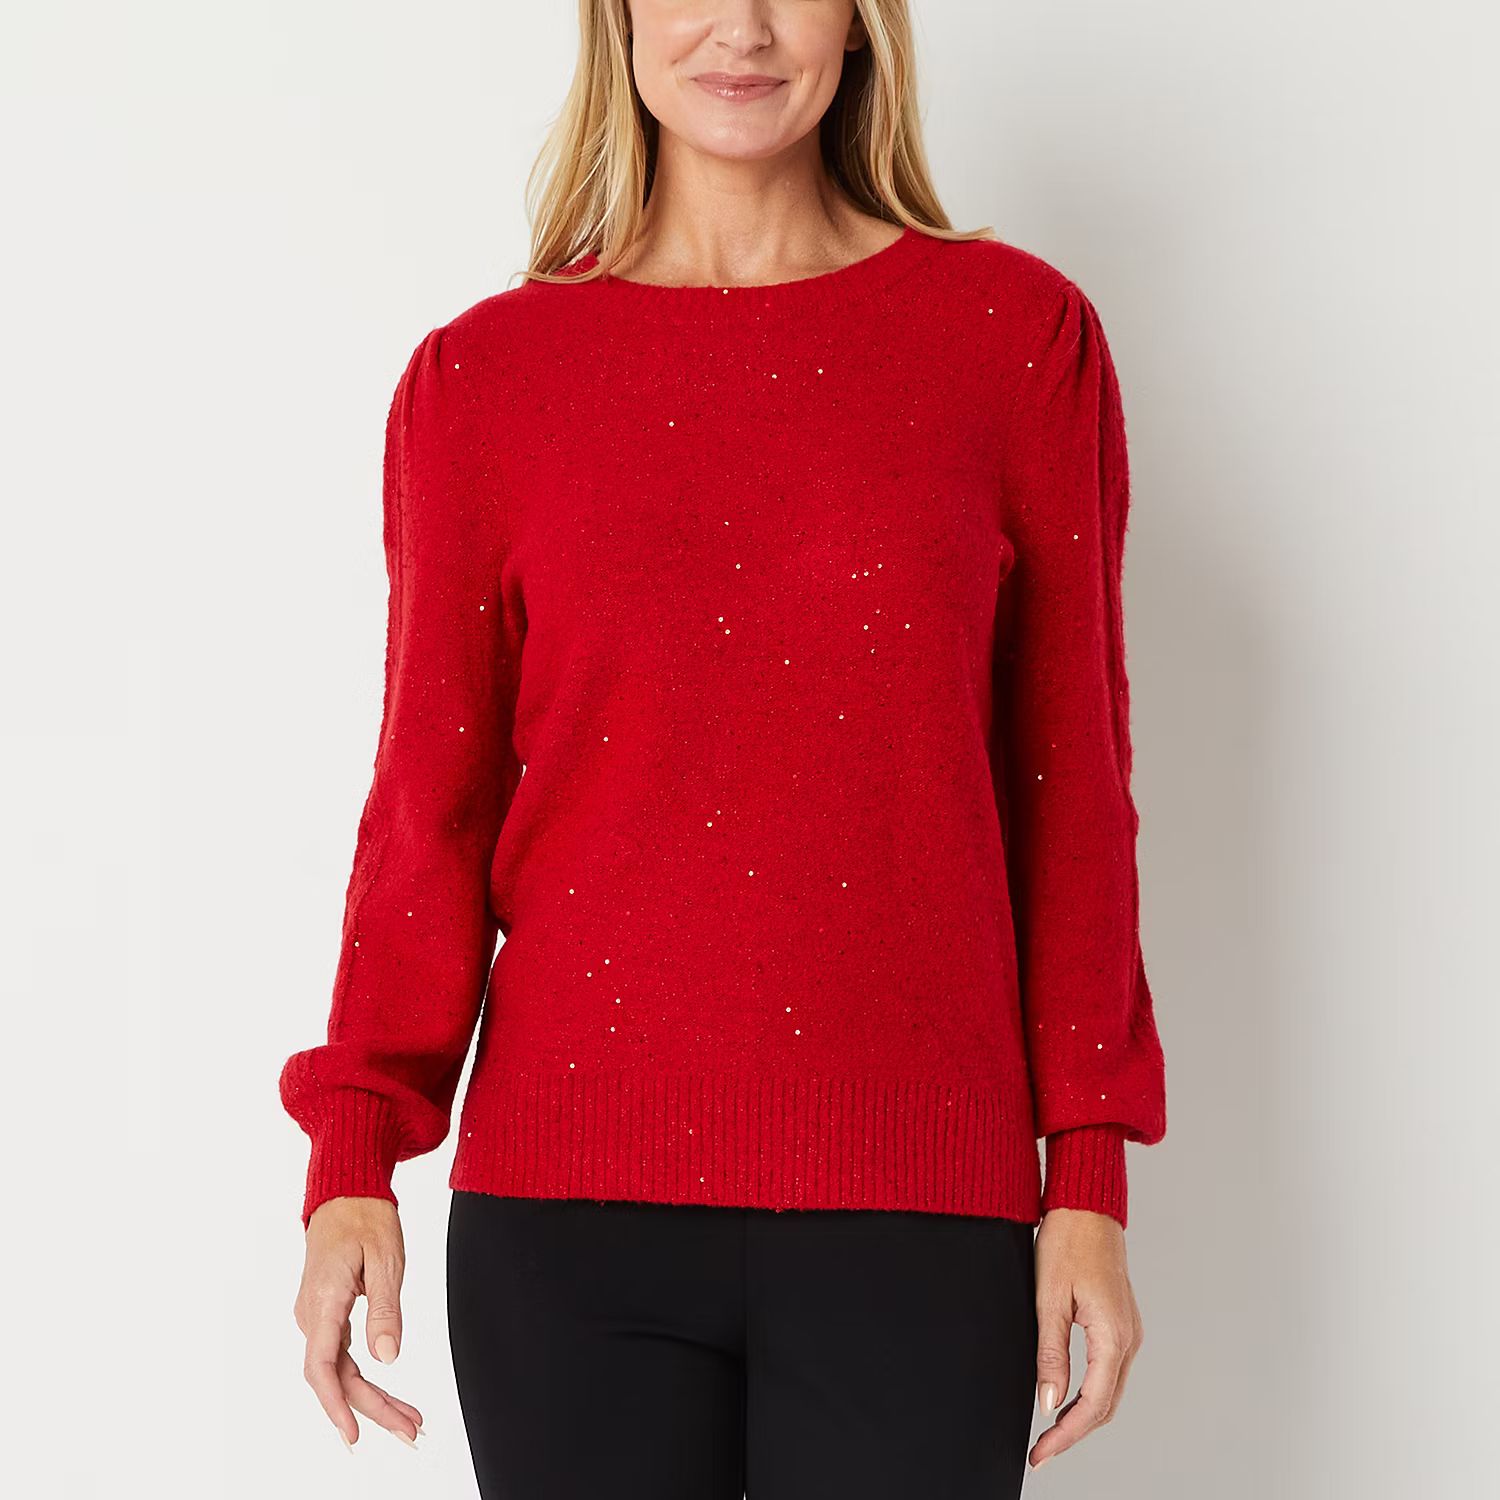 Liz Claiborne Shine Womens Crew Neck Long Sleeve Pullover Sweater | JCPenney